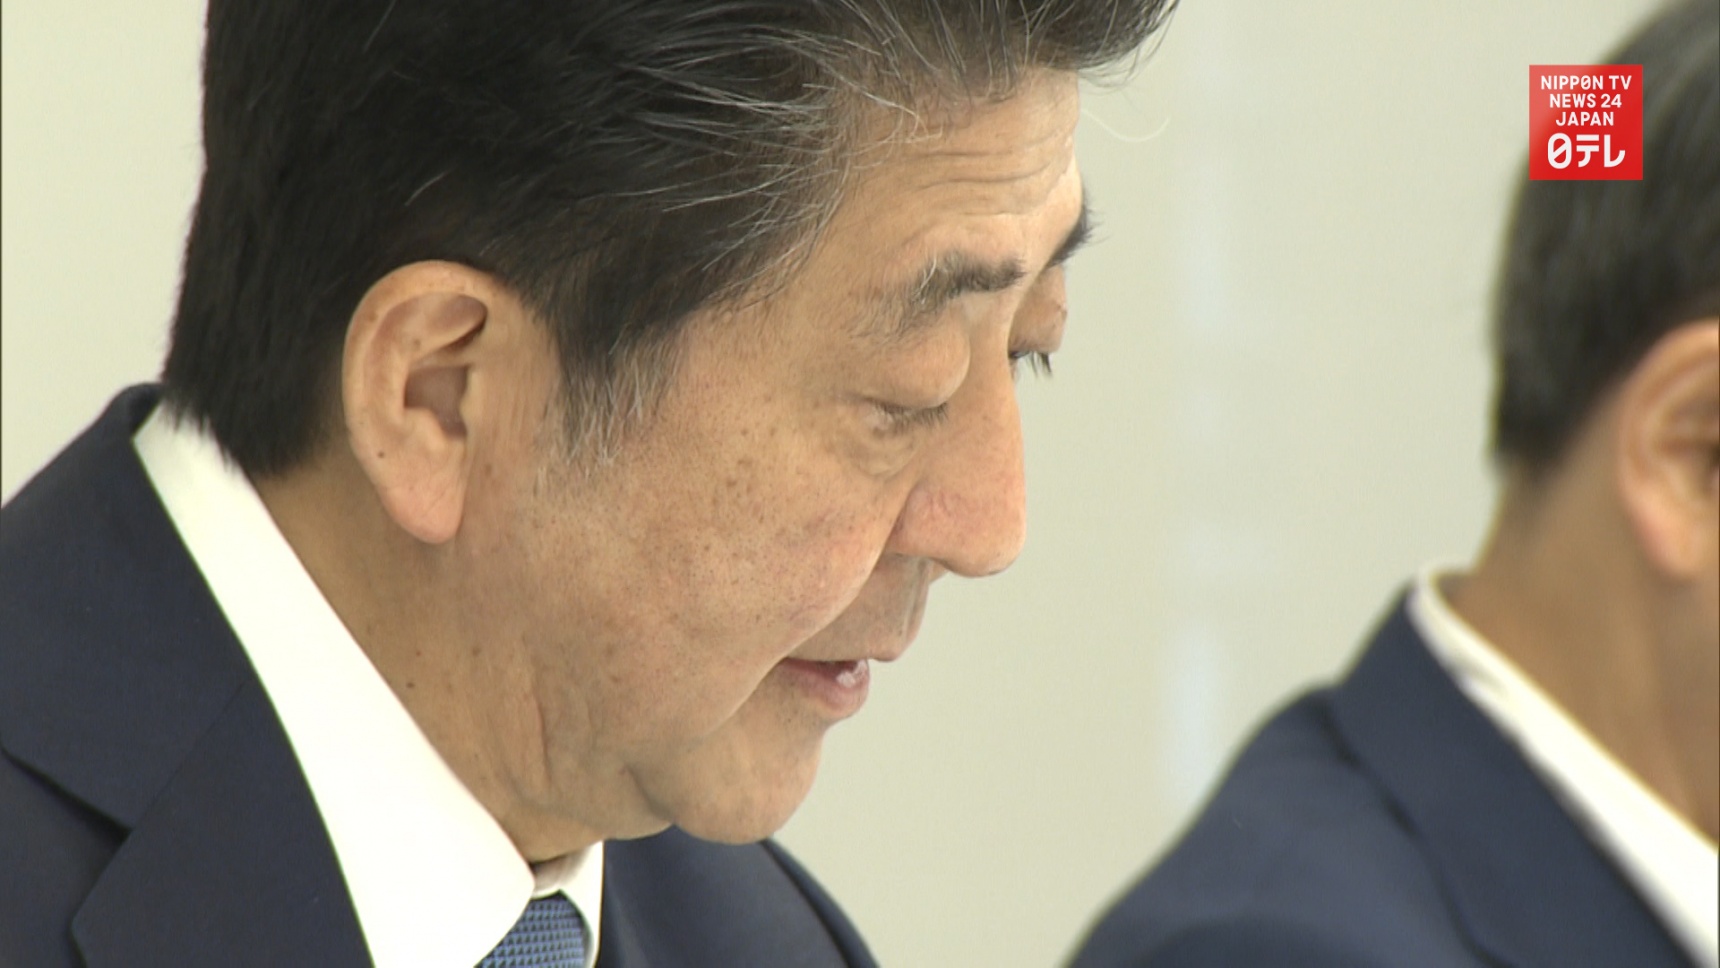 Abe Resigns As PM Over Health